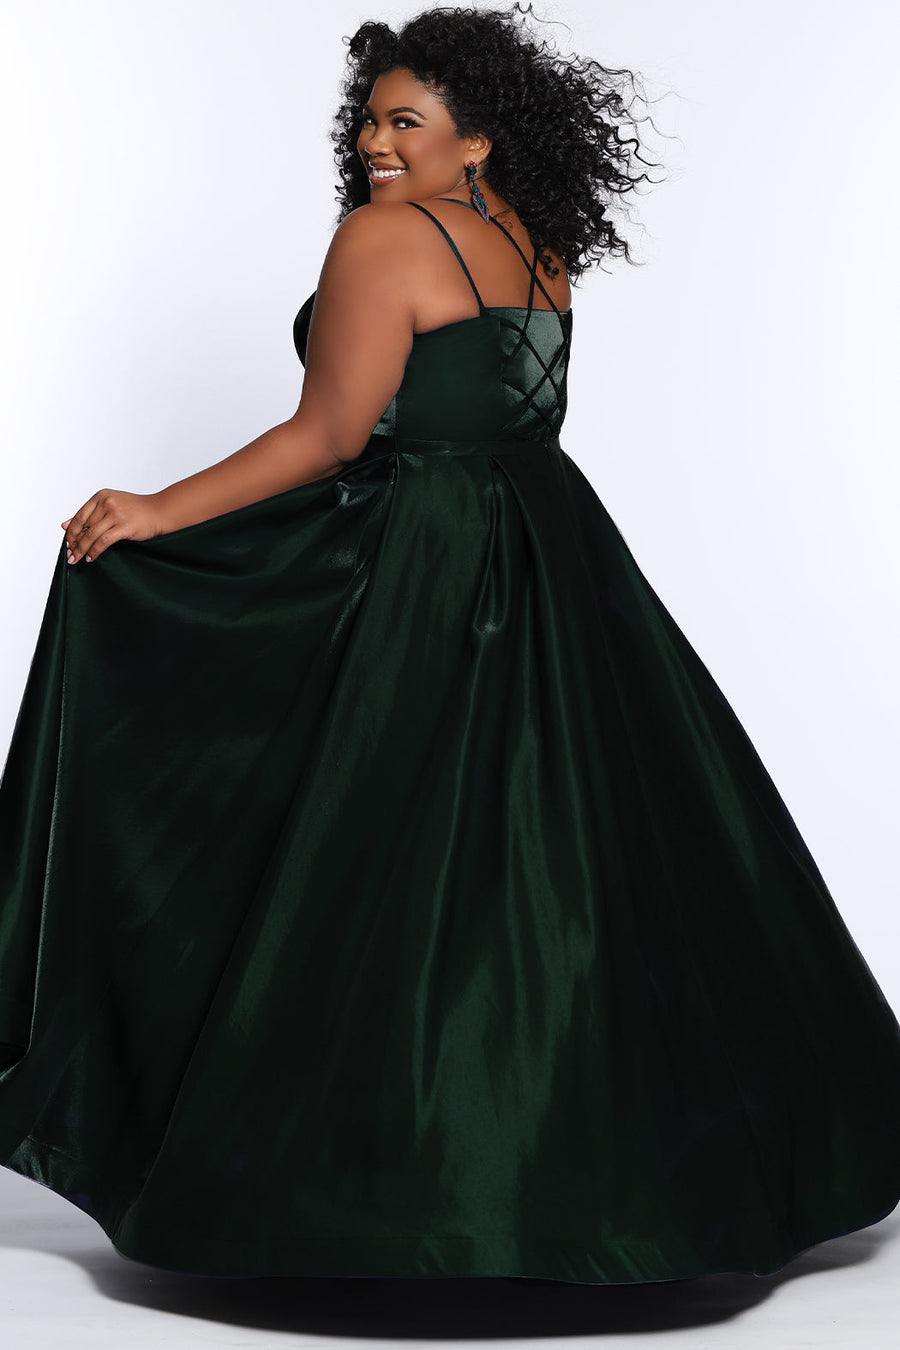 Tease Prom TE2226 Back view Plus size a-line dress in forest green with spaghetti straps, pockets, and lace up back.